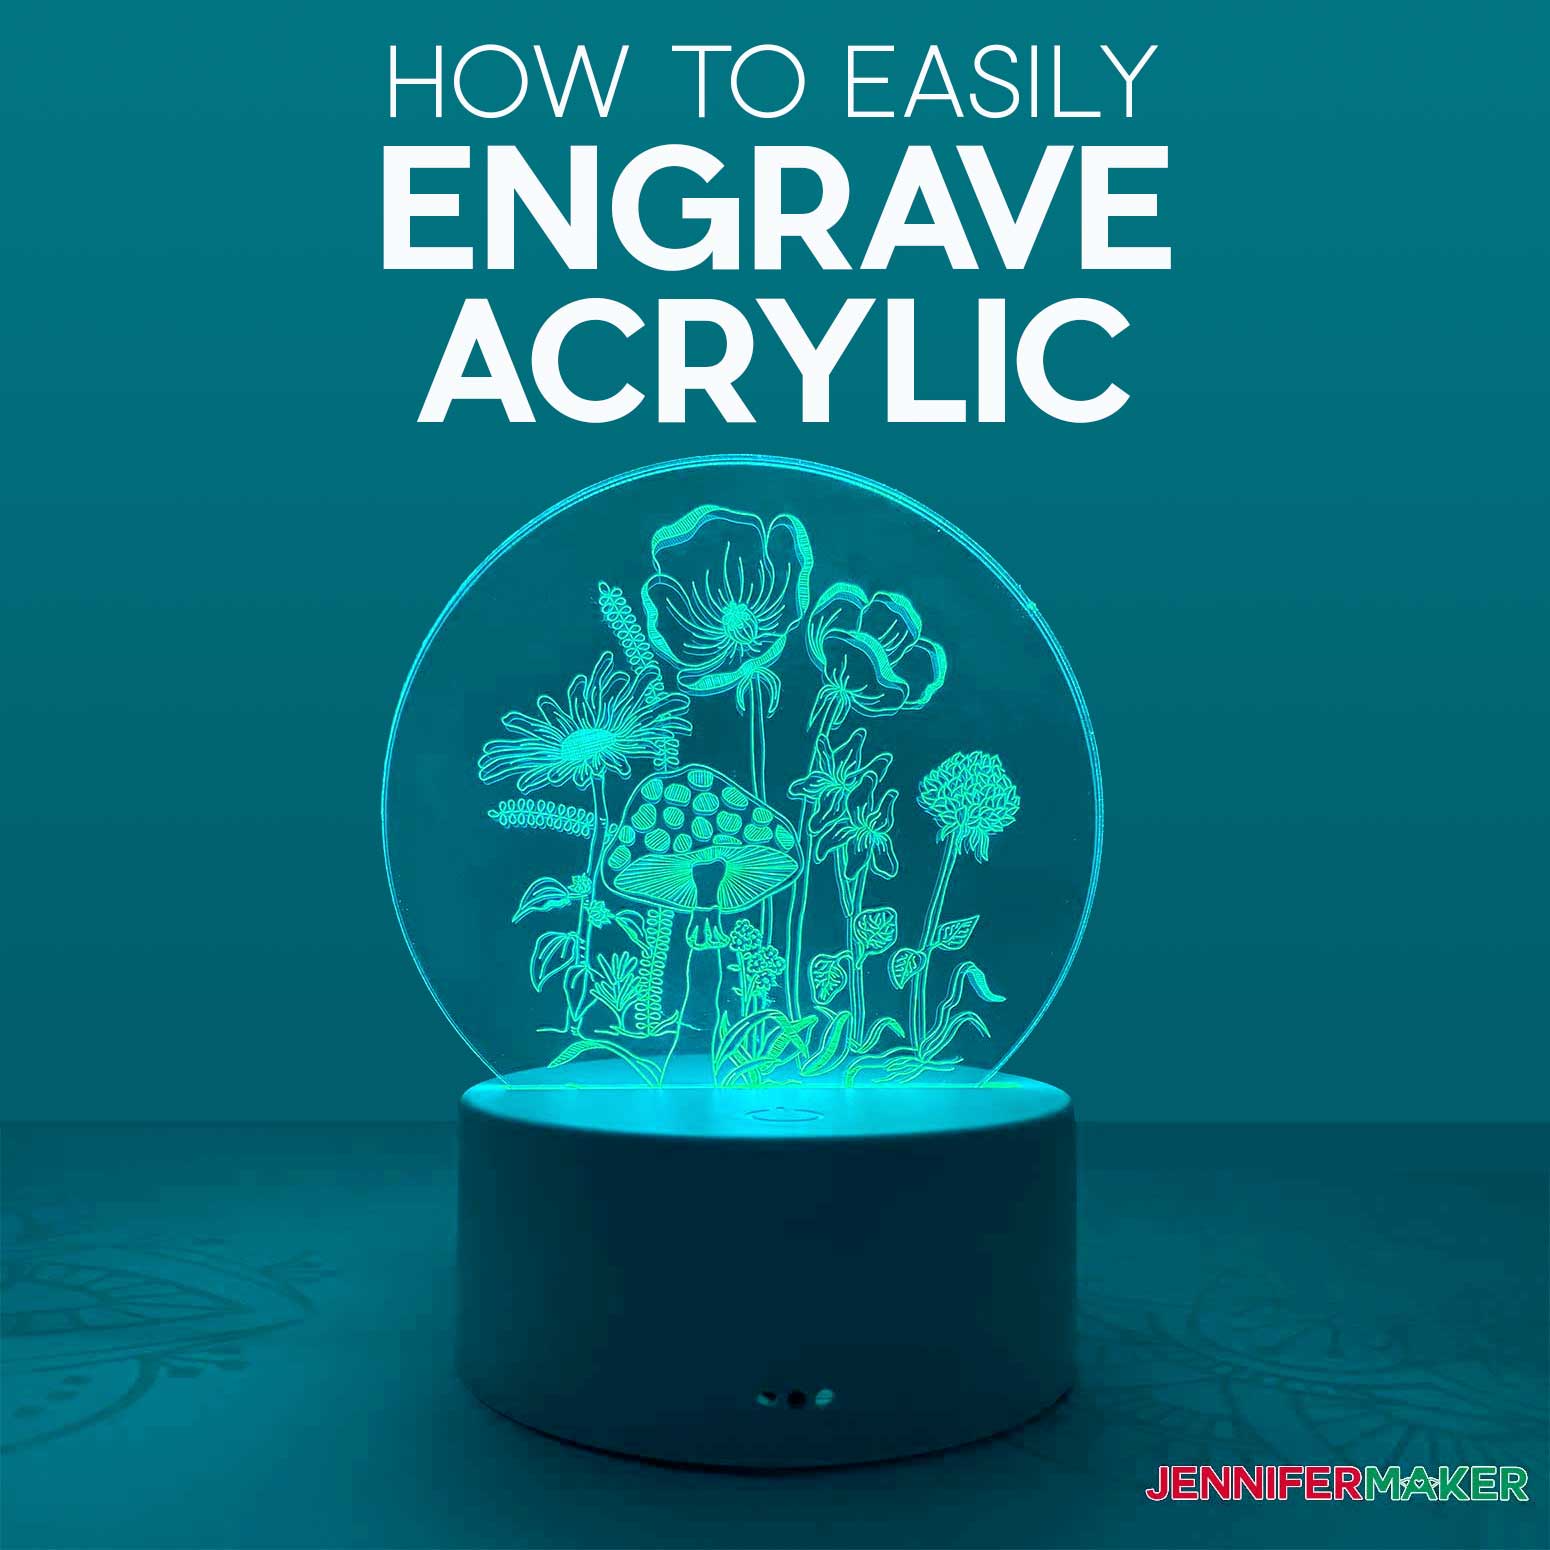 How to engrave acrylic with a Cricut Maker to make a beautiful nightlight - full tutorial and free SVG cut files